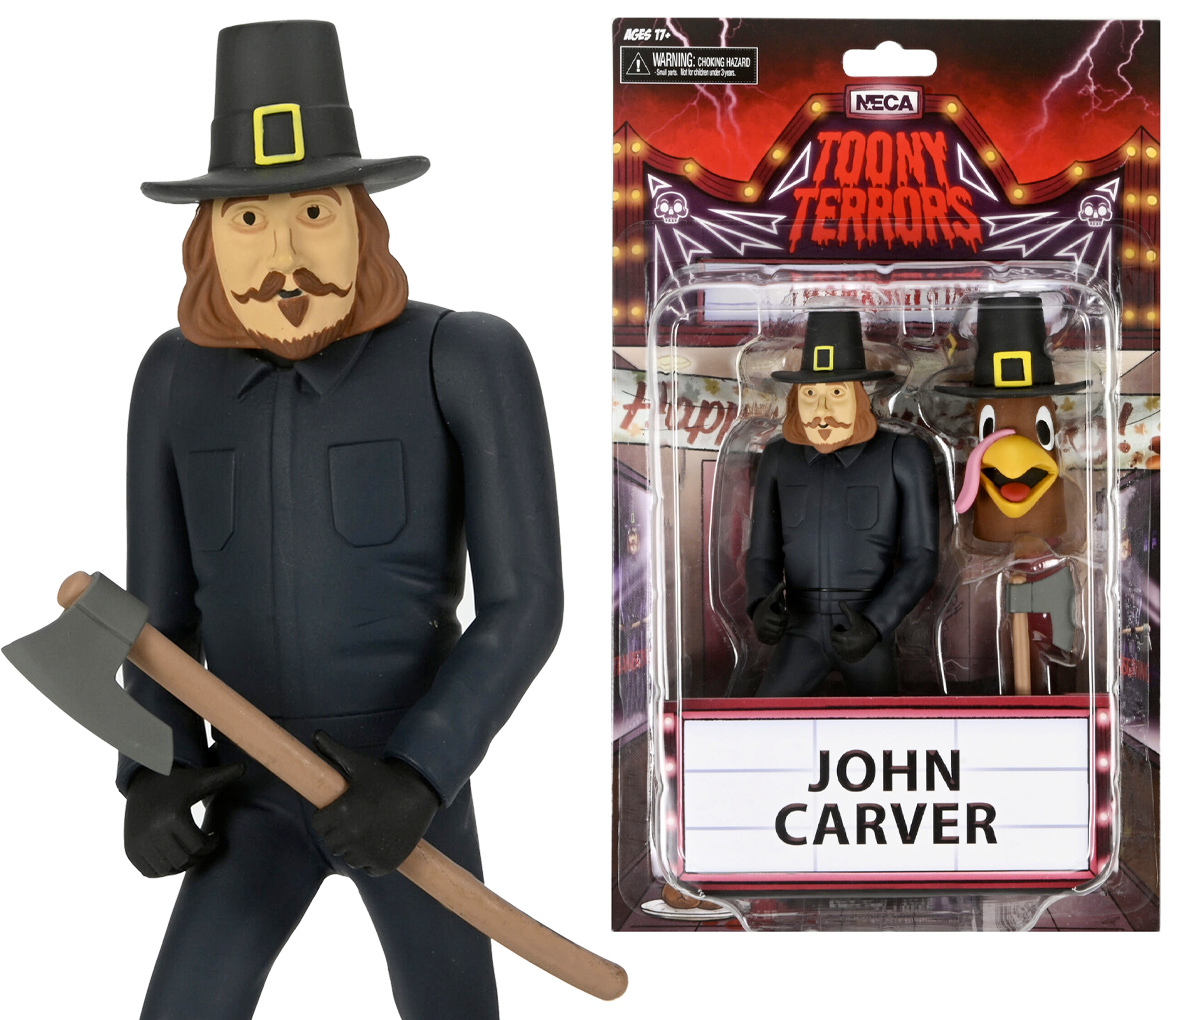 Action Figures John Carver Neca from the Movie Bloody Holiday (Thanksgiving) by Eli Roth